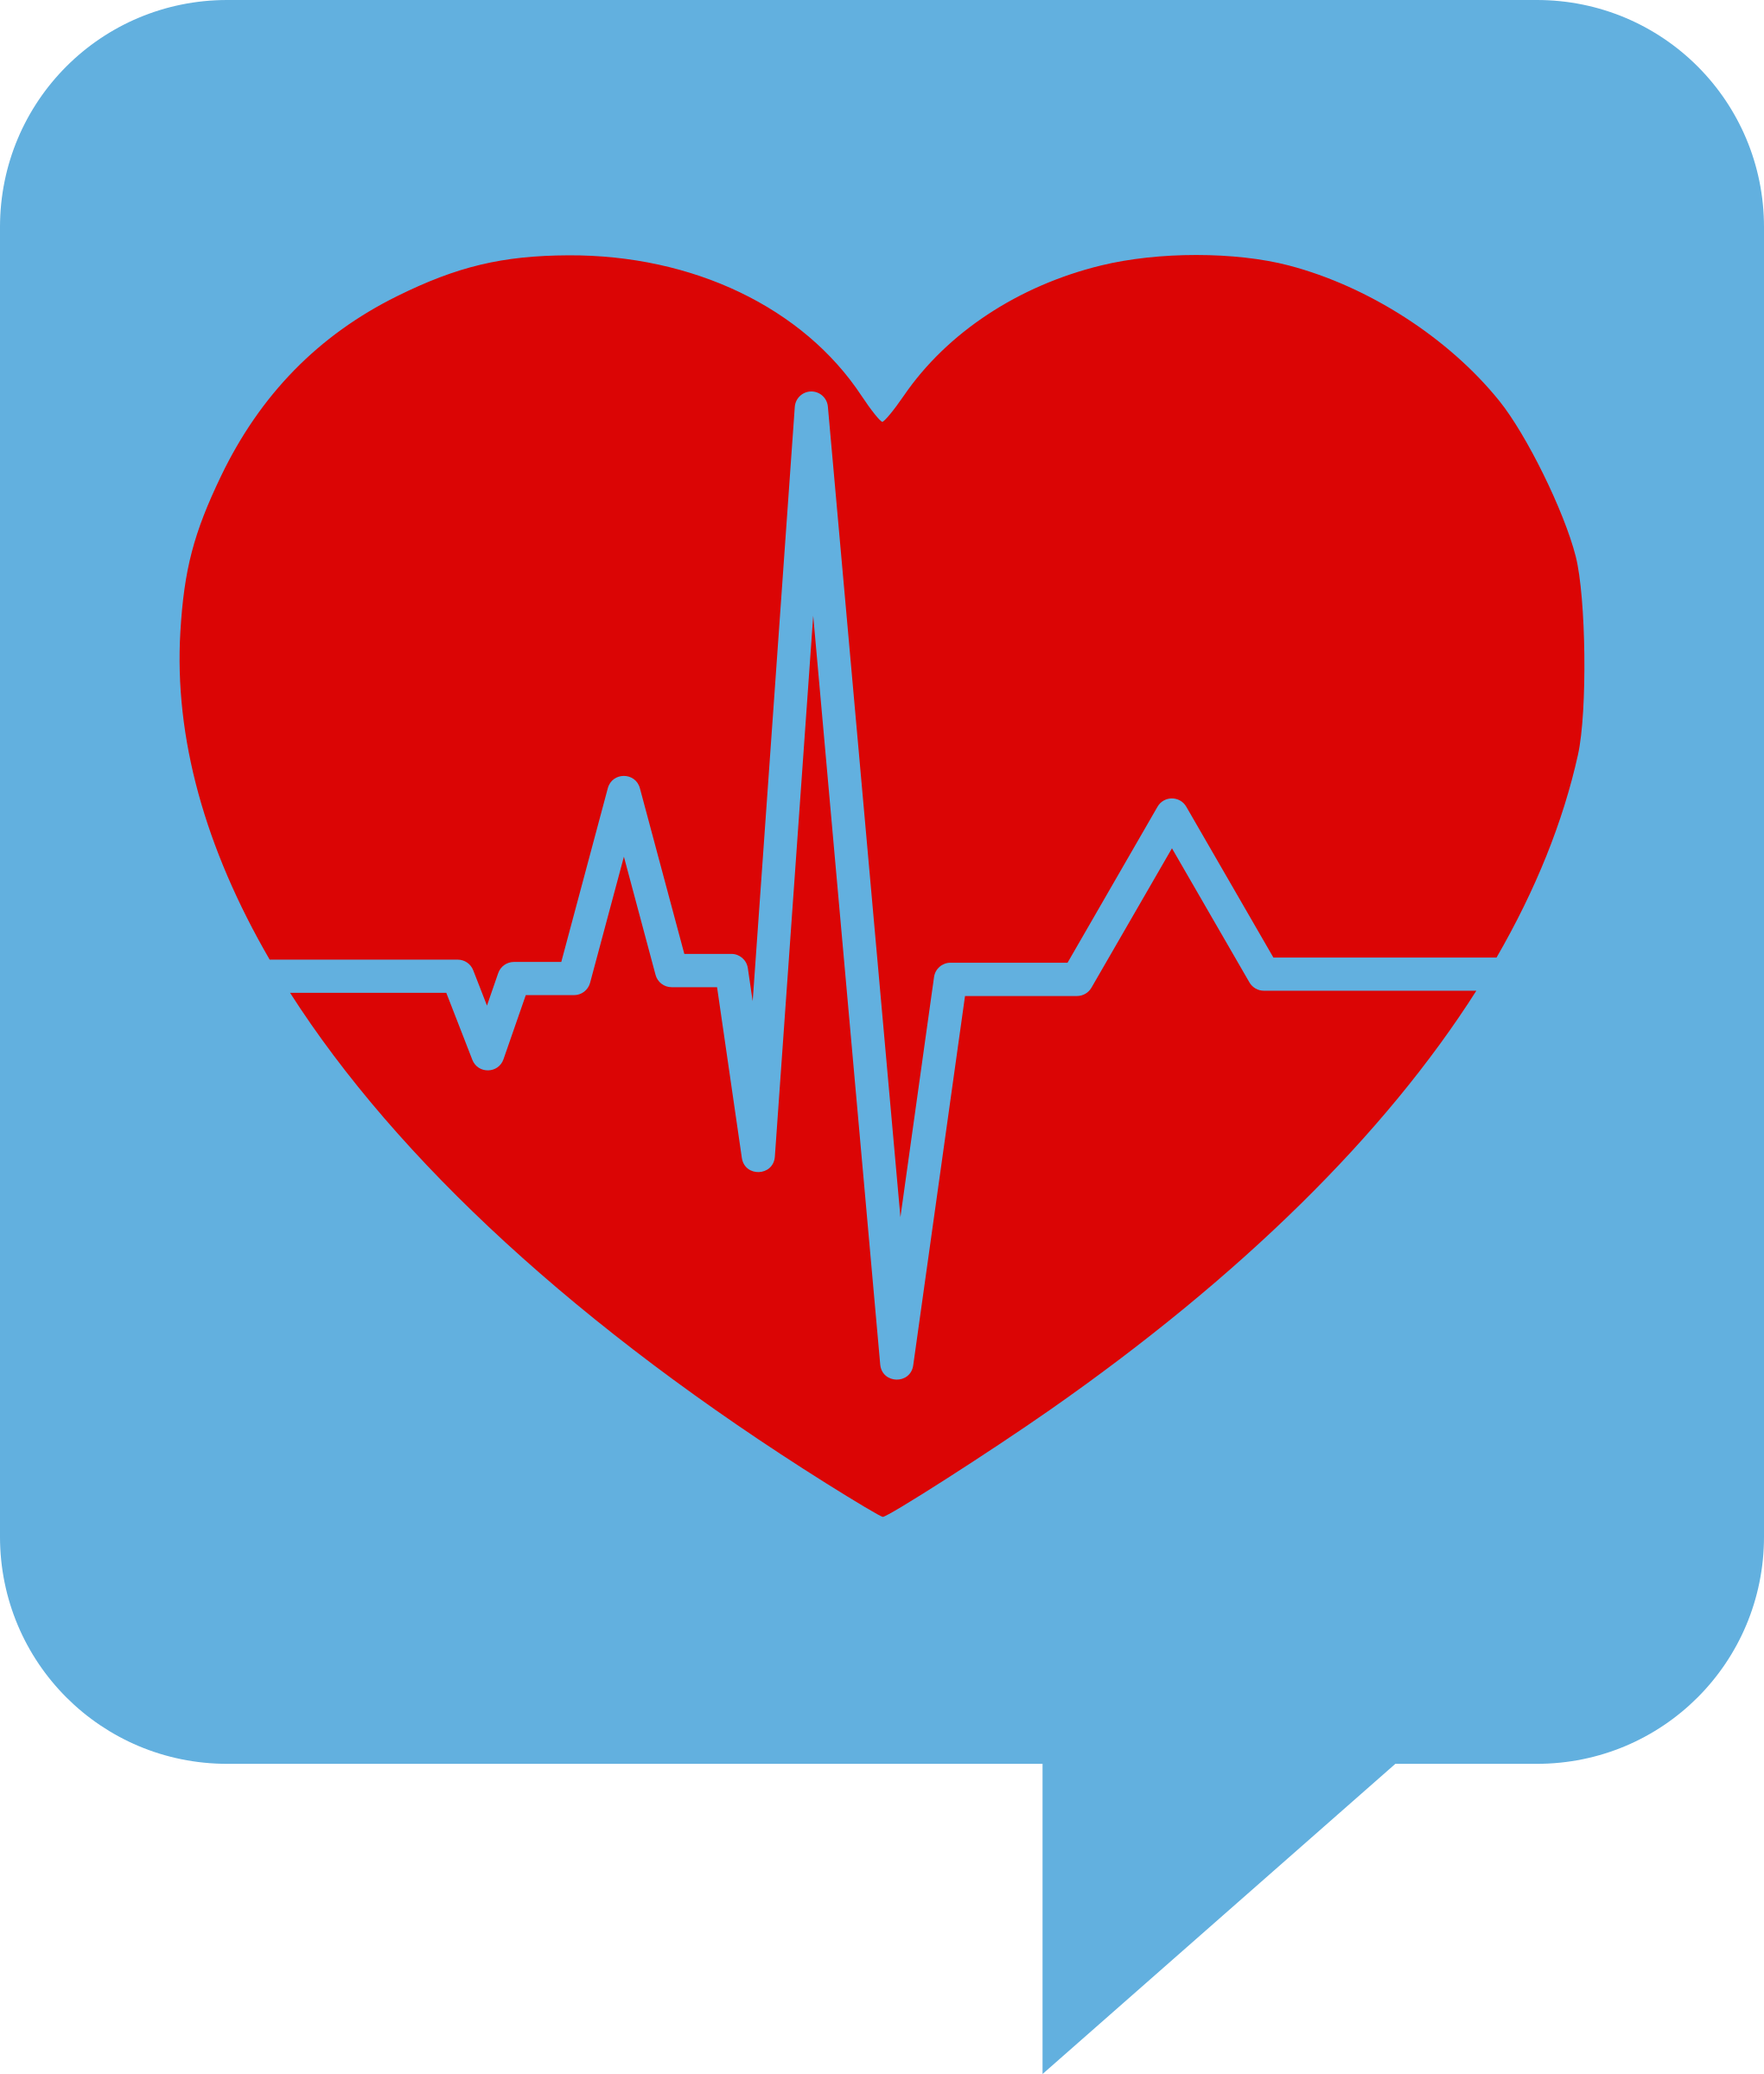 Heartbeat Logo For Health And Others Art Clipart